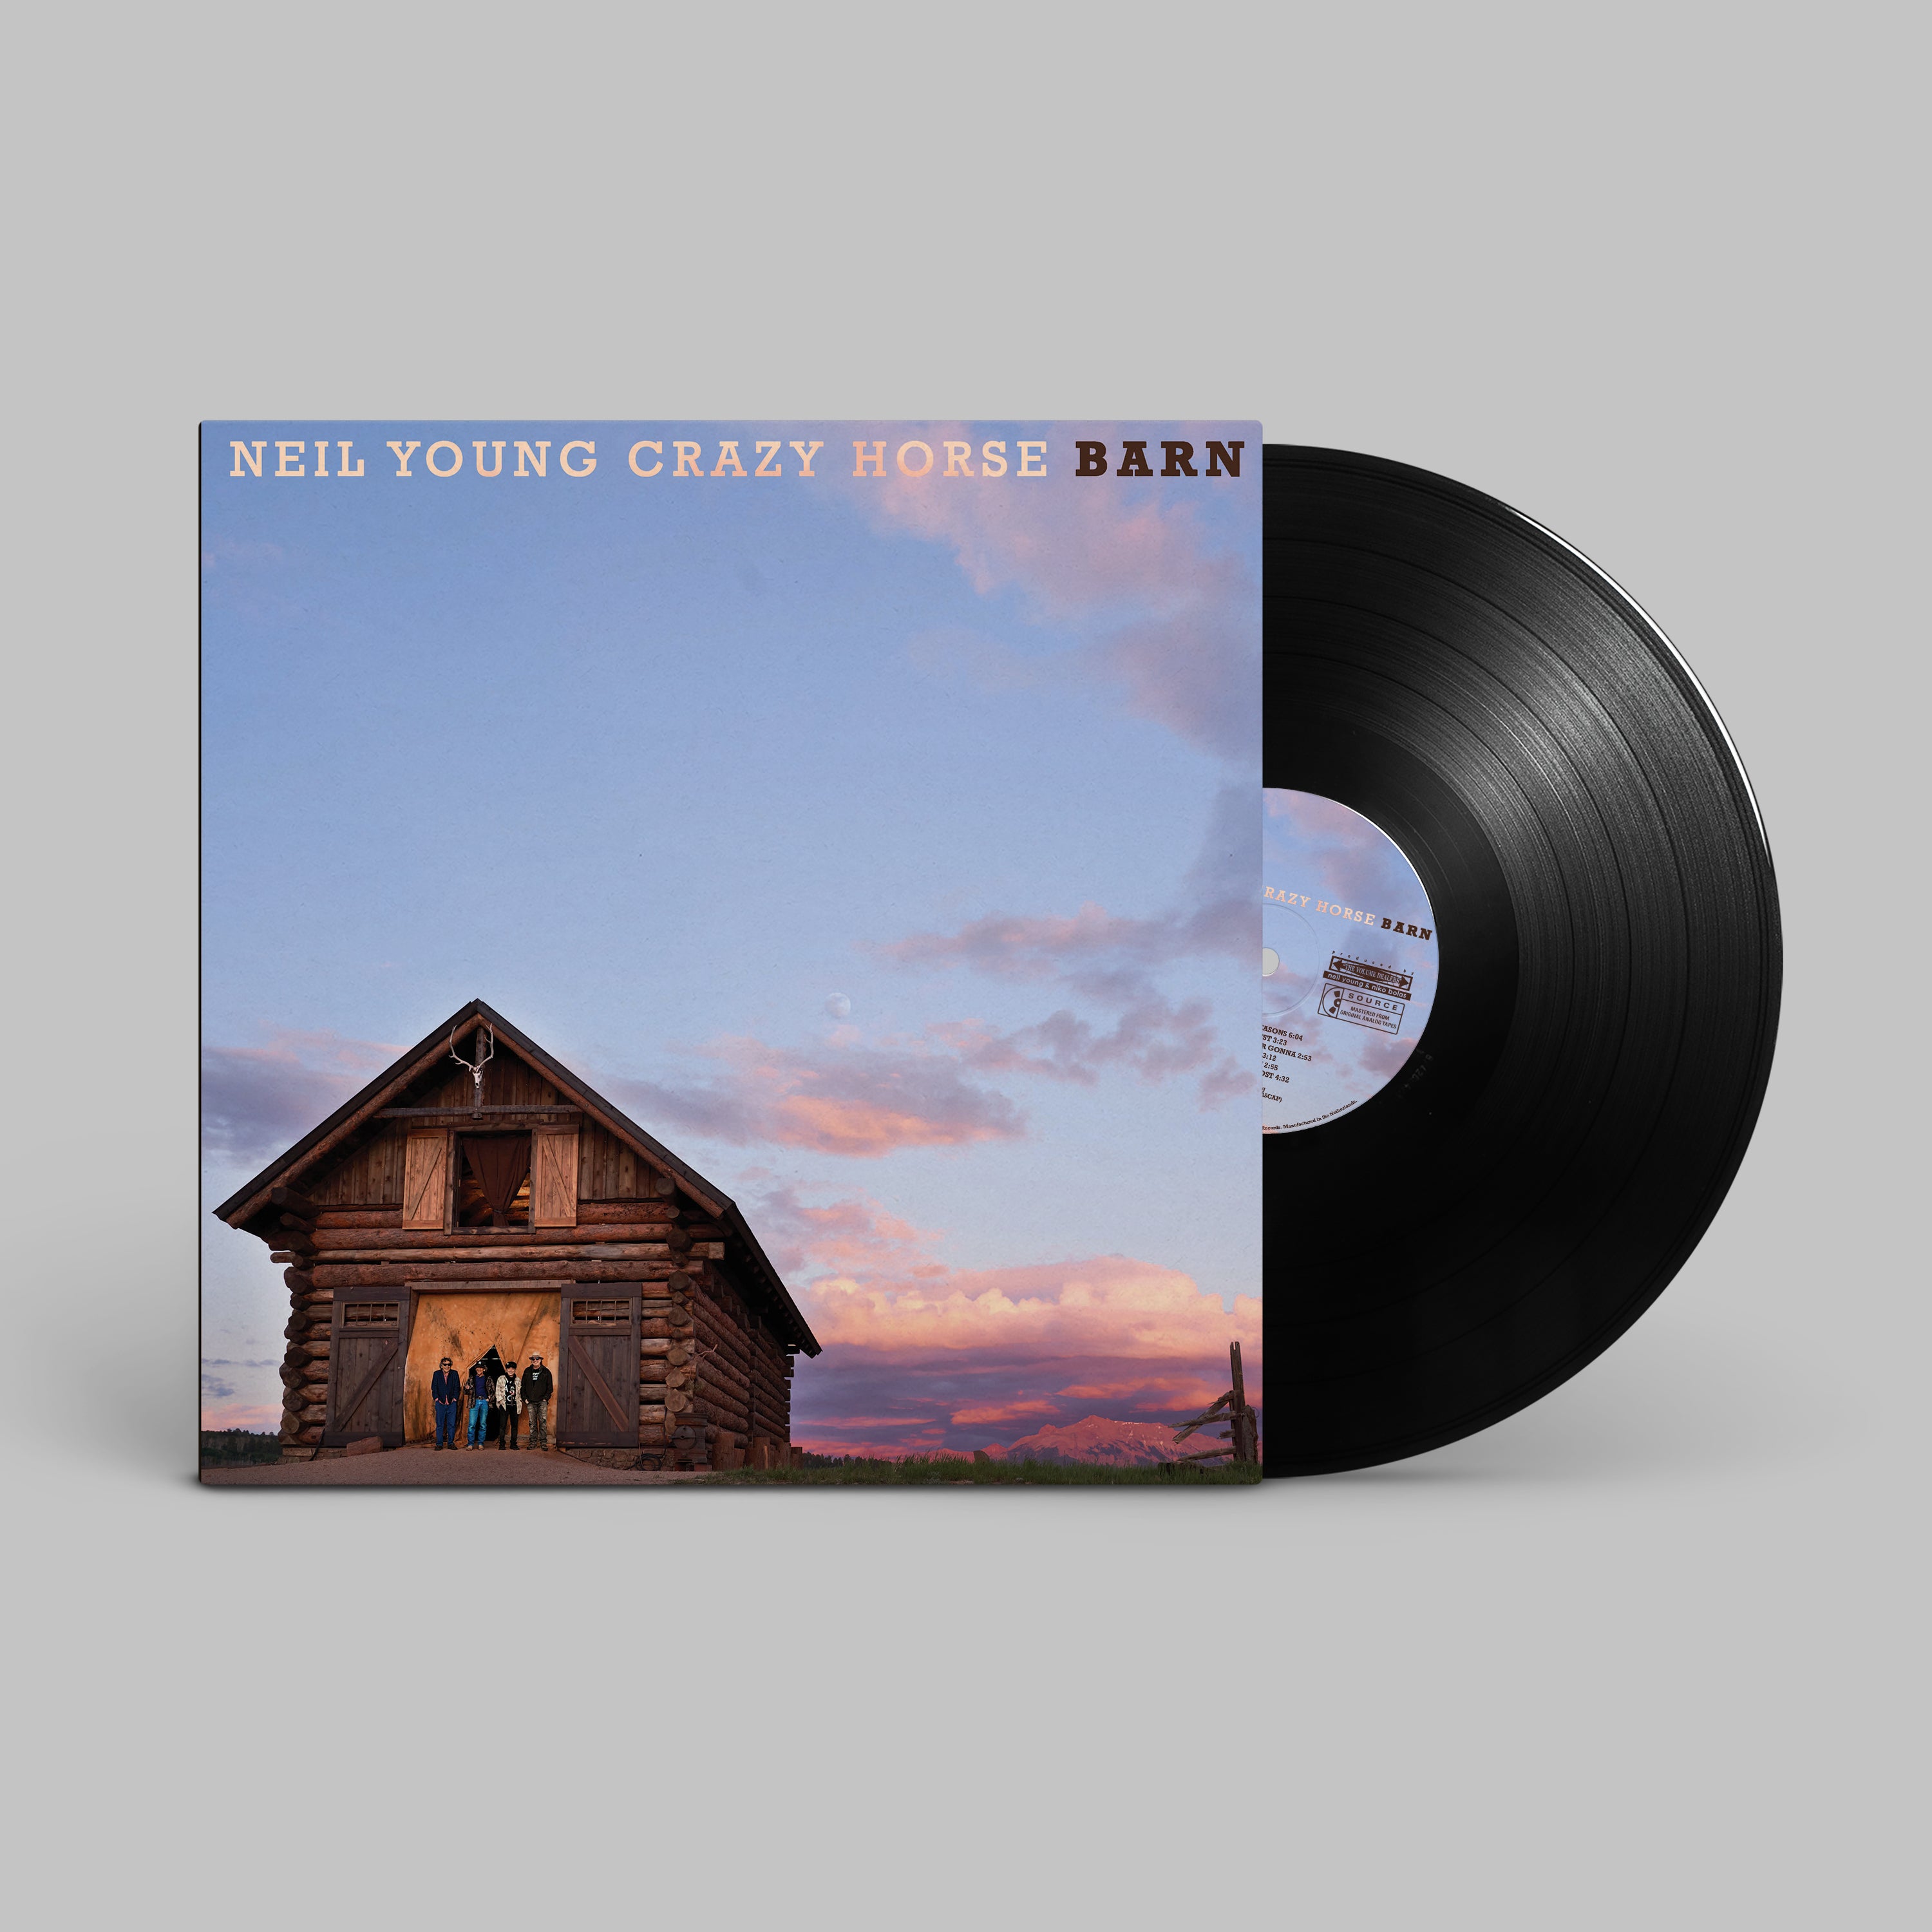 Neil Young & Crazy Horse | Barn (Indie Exclusive, Special Edition, Photo Book) | Vinyl